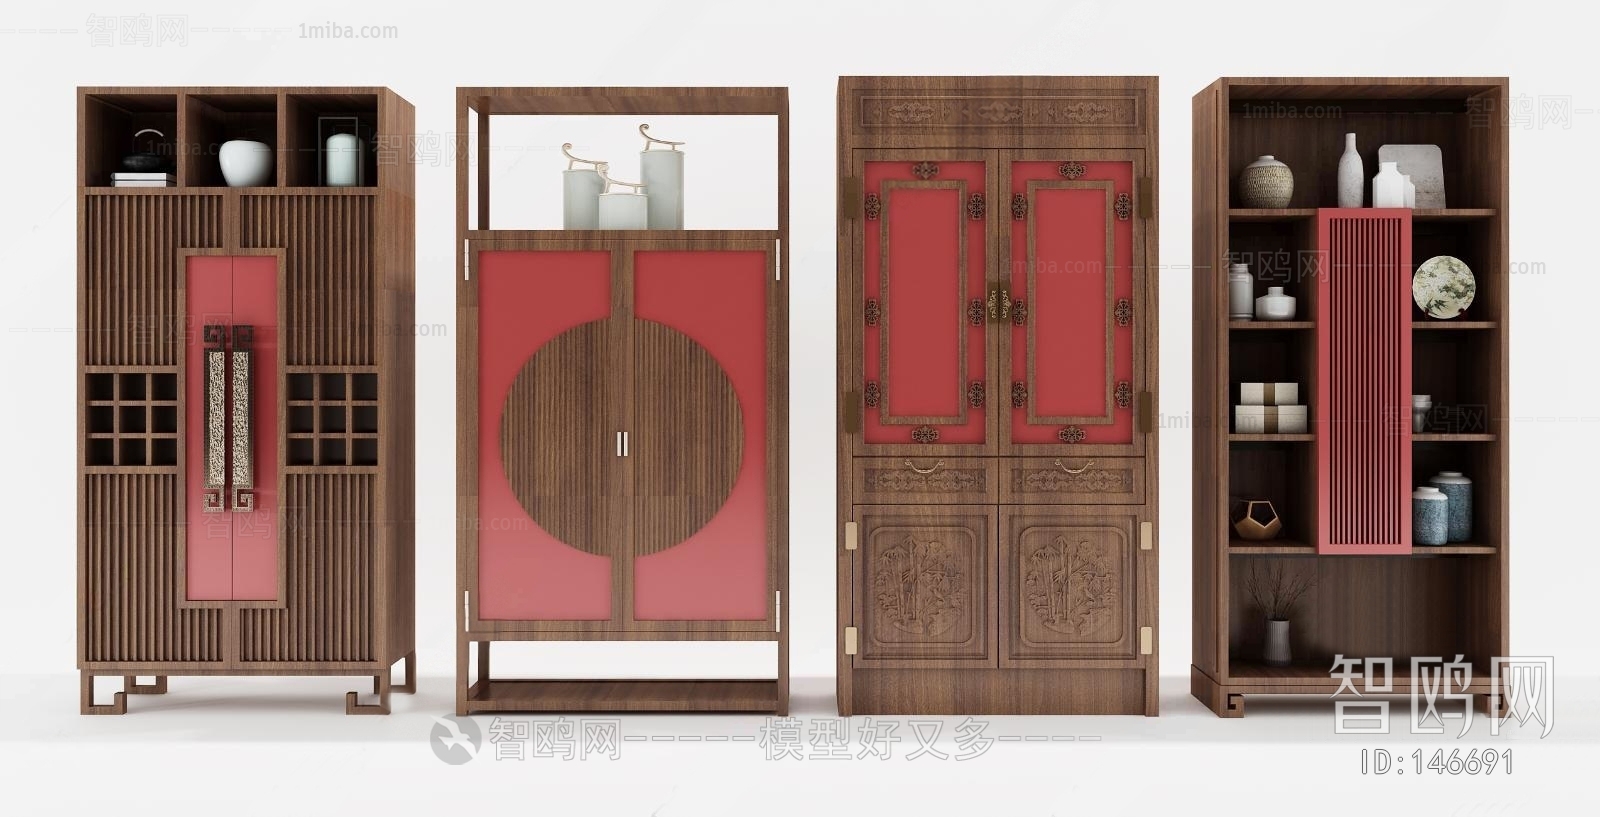 Chinese Style Antique Rack